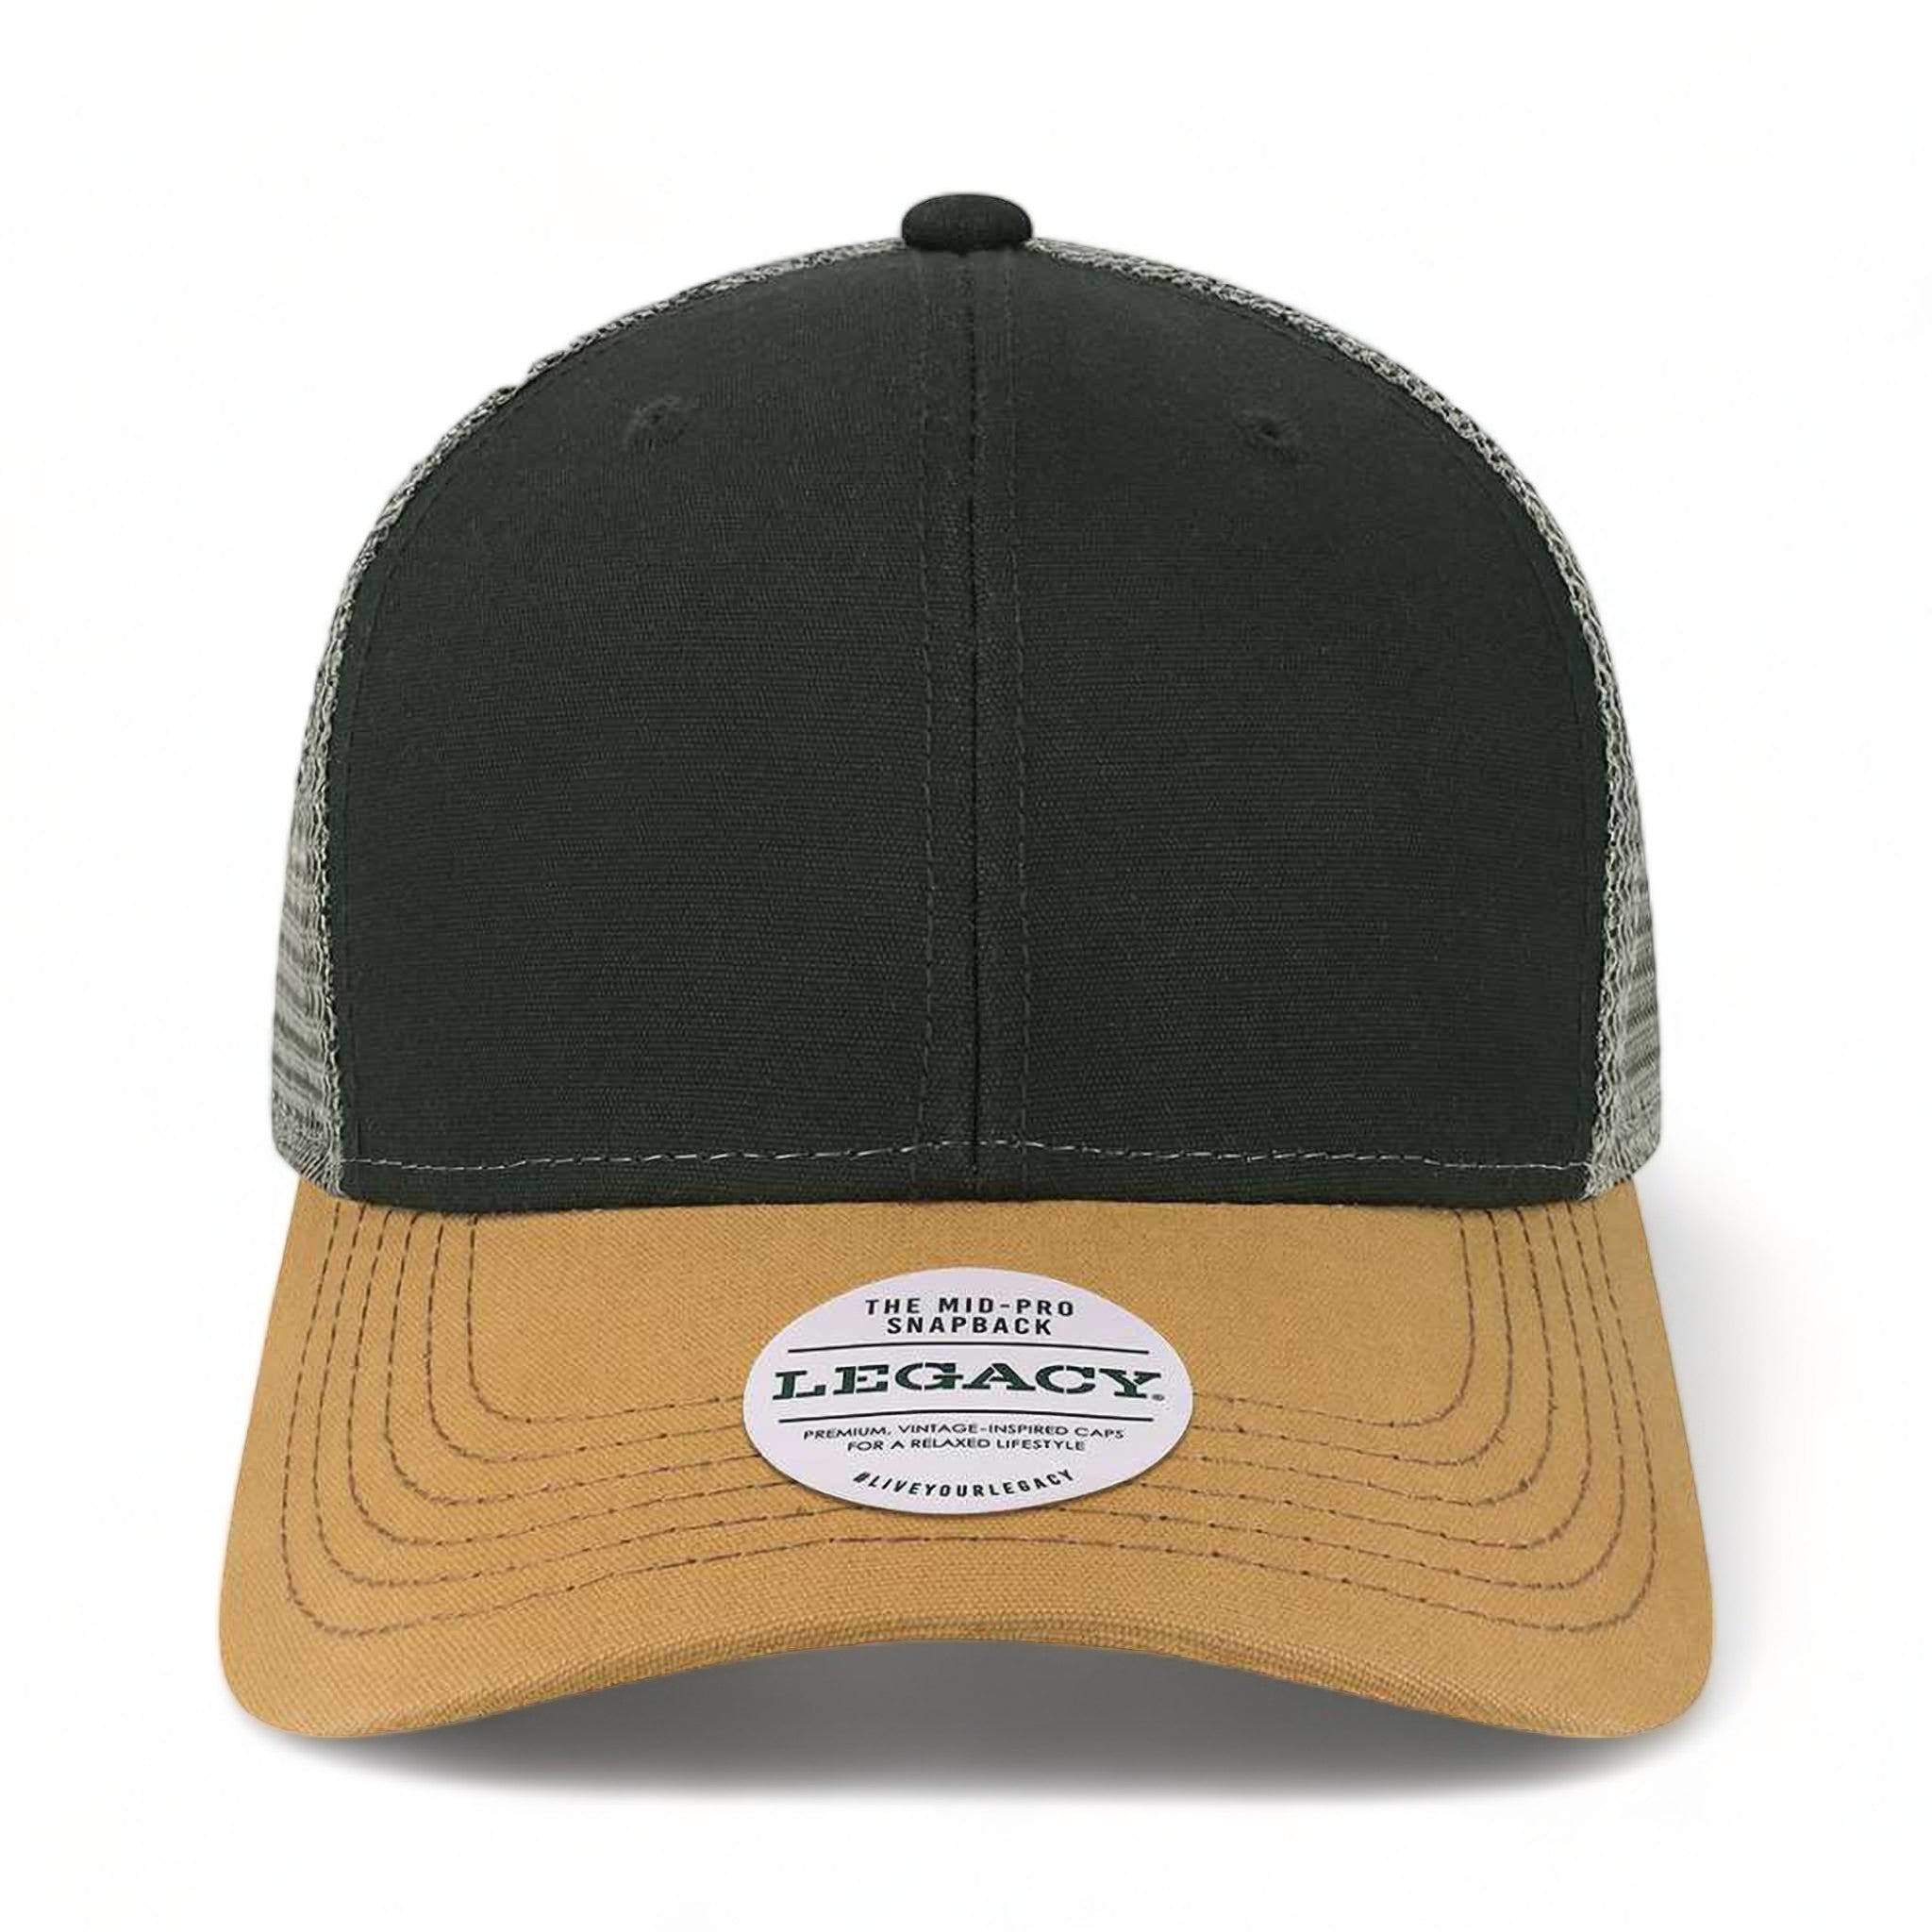 Front view of LEGACY MPS custom hat in black, caramel and dark grey